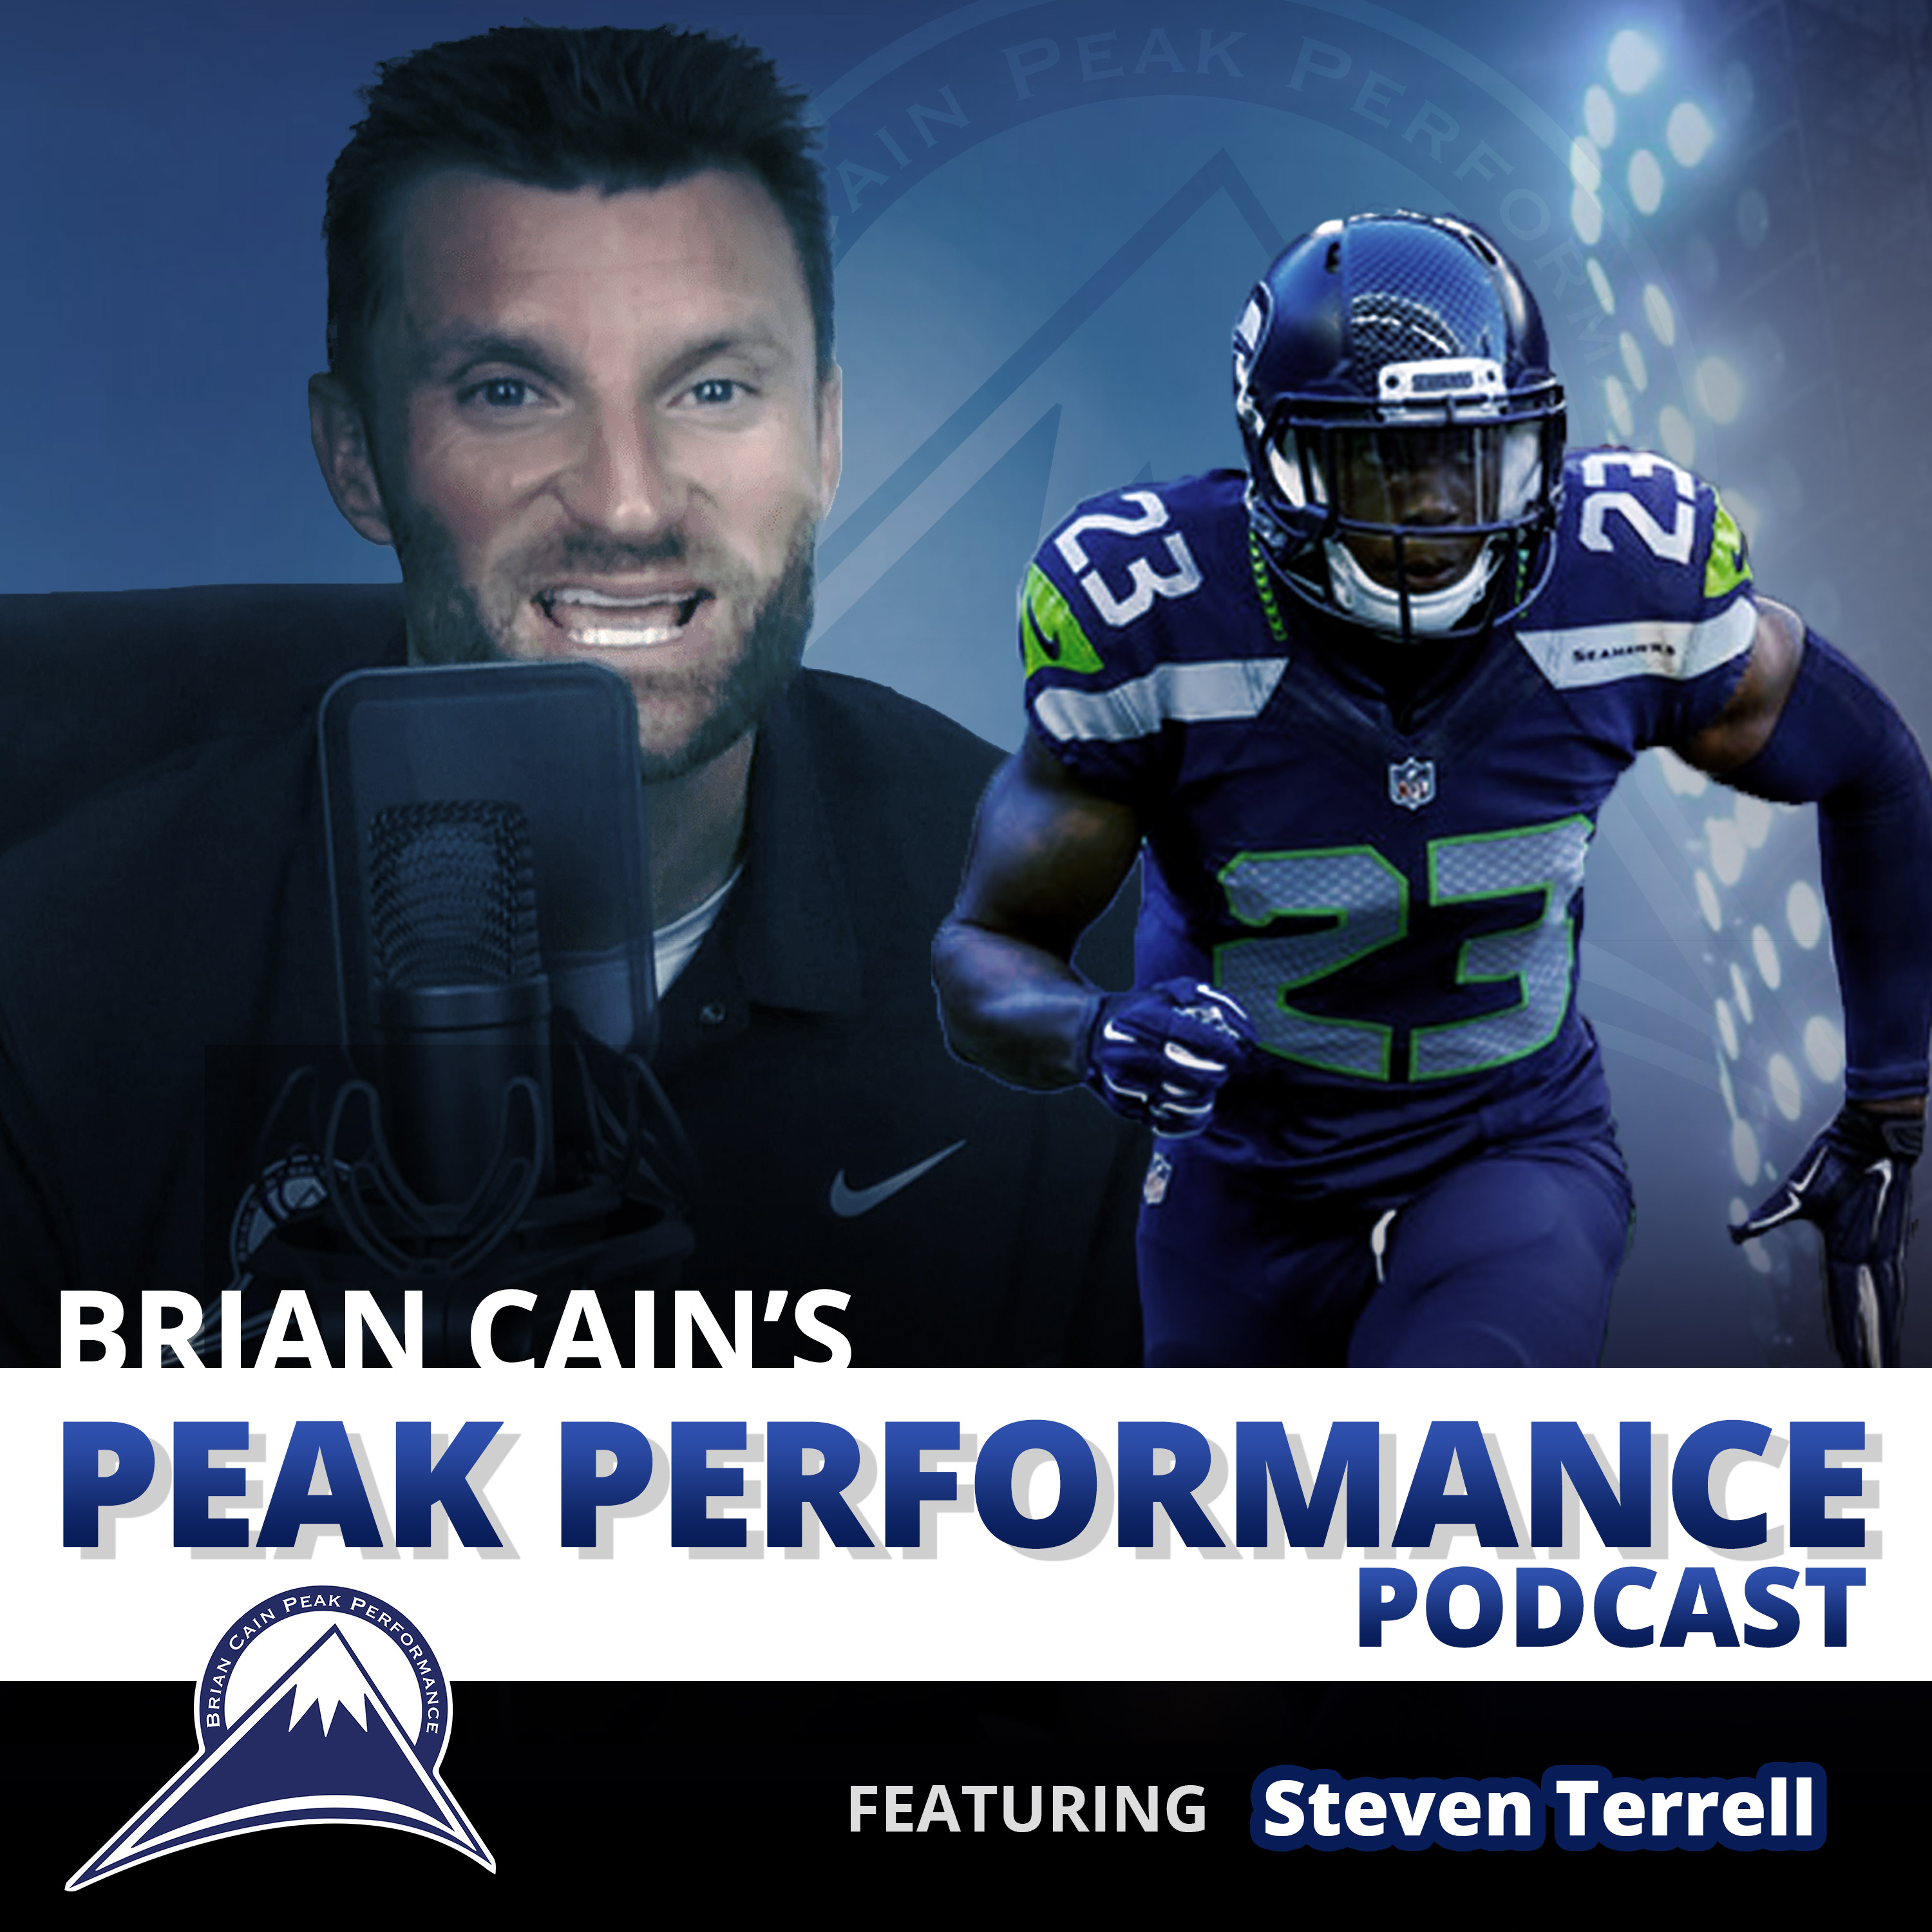 BC152. Steven Terrell - You Shouldn’t Have to Coach Effort